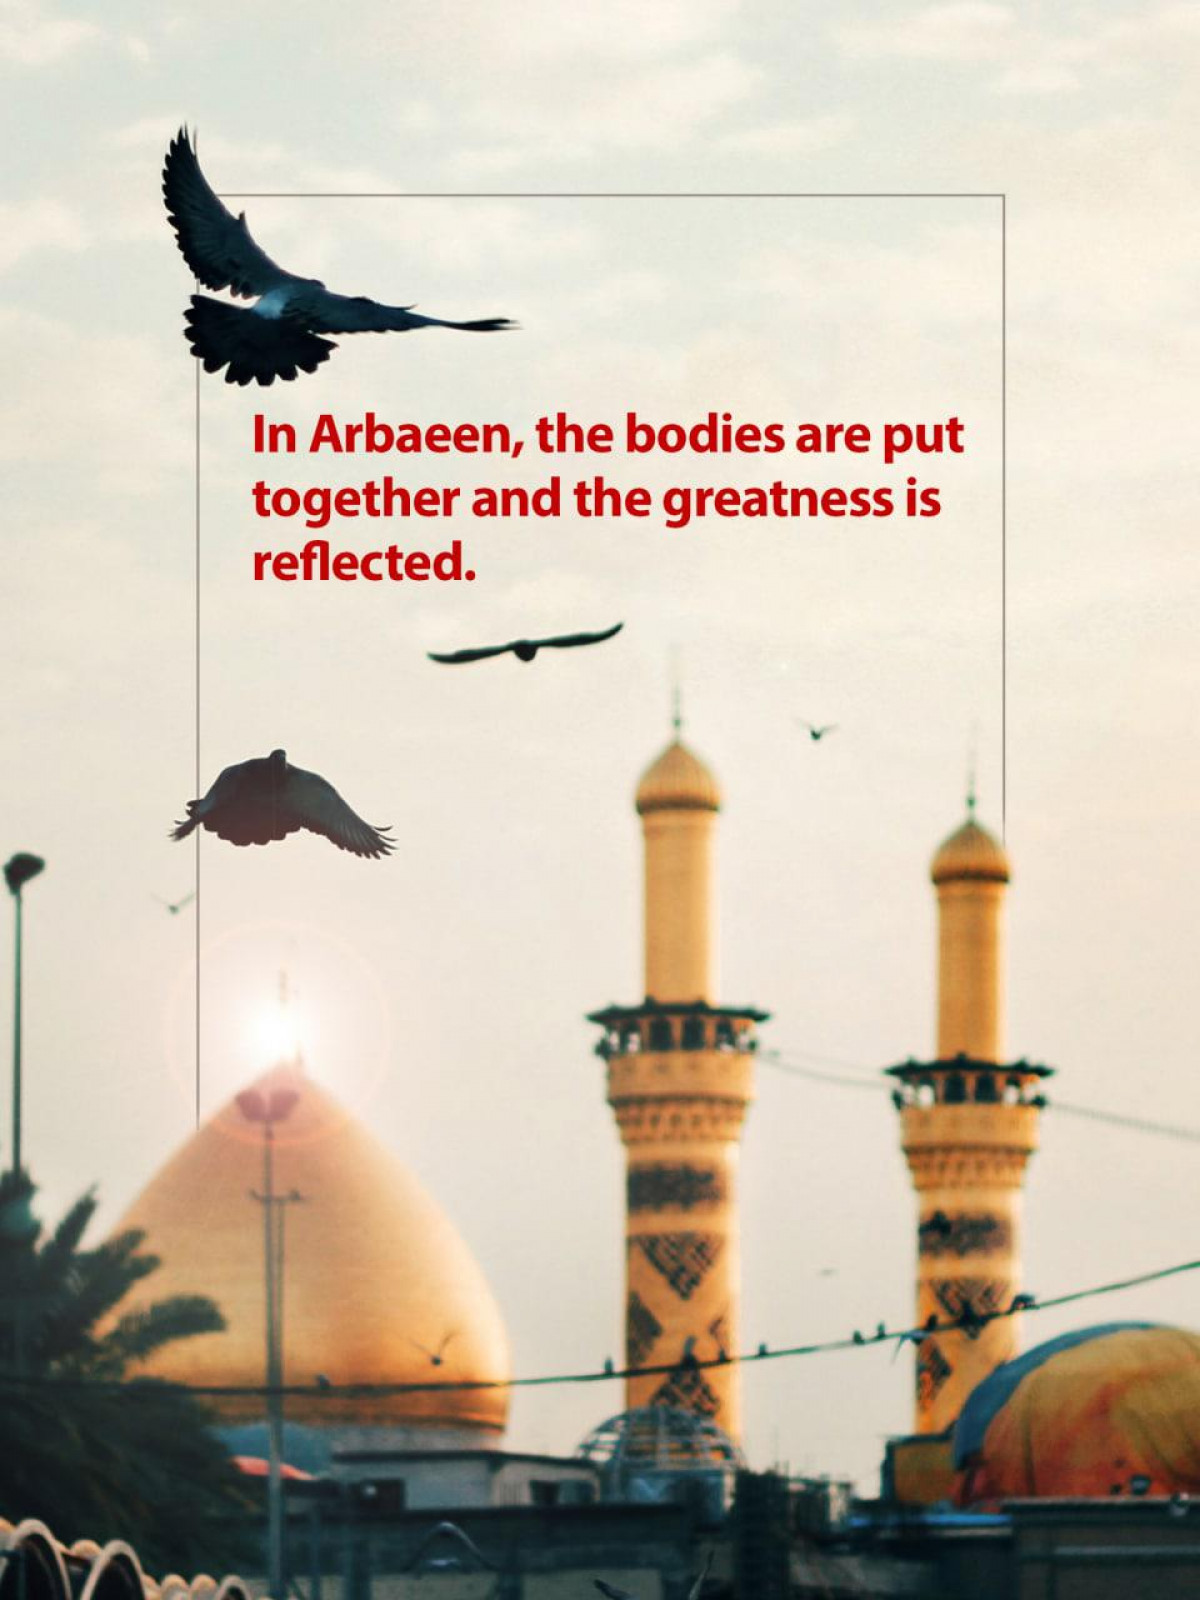 In Arbaeen, the bodies are put together and the greatness is reflected